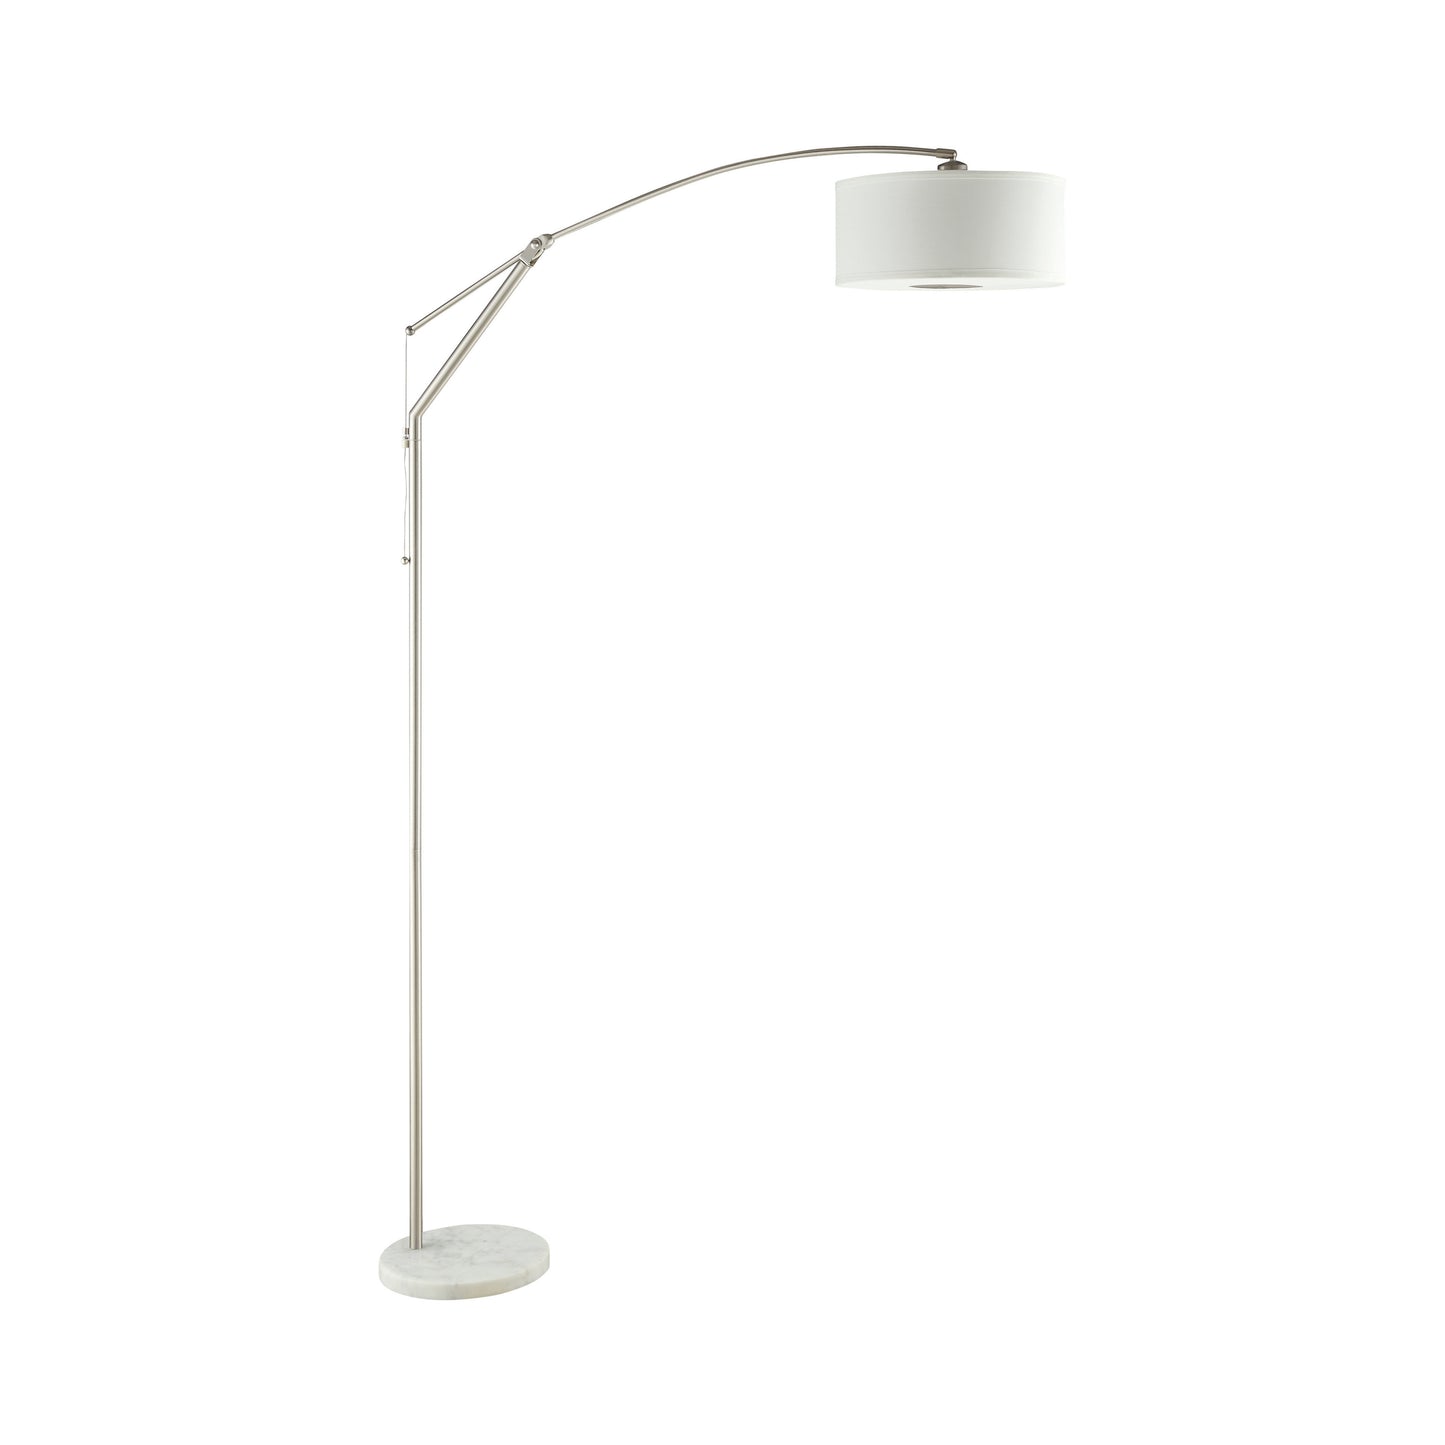 Adjustable Arched Arm Floor Lamp Chrome And White - 901490